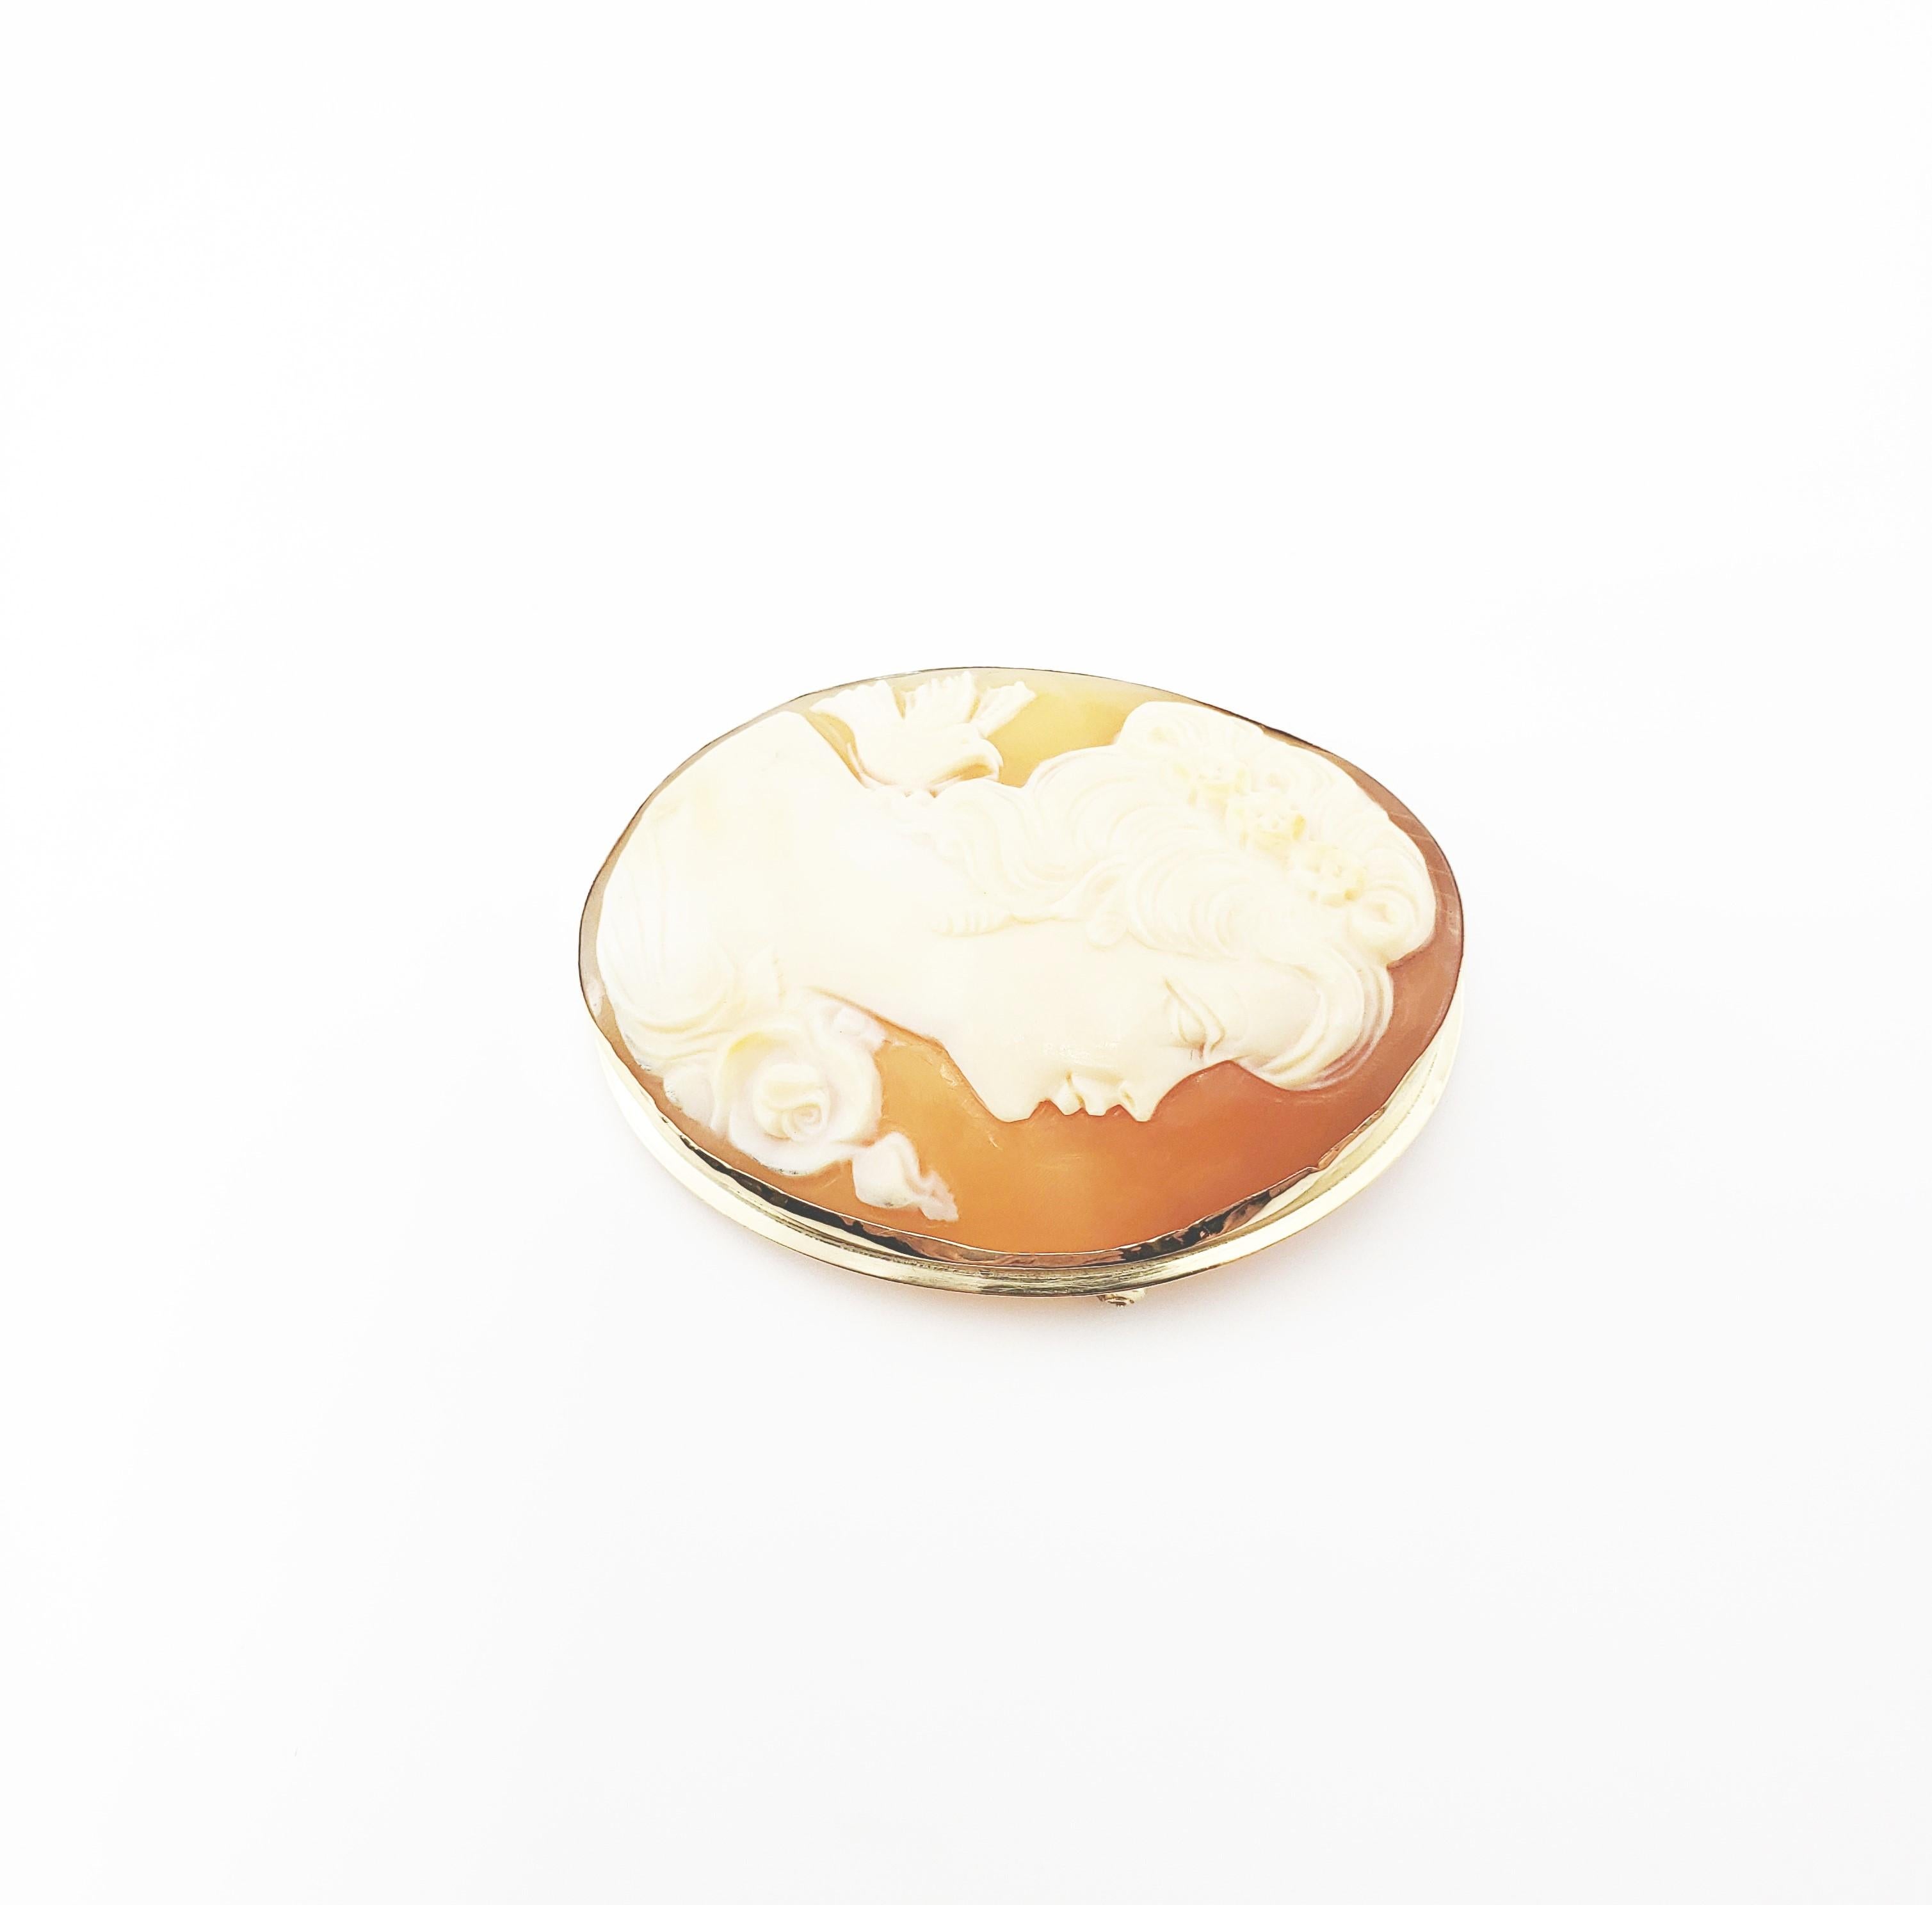 Vintage 14 Karat Yellow Gold Cameo Brooch/Pendant-

This elegant cameo features a lovely lady in profile set in classic 14K yellow gold.
Can be worn as a brooch or a pendant.

Size: 52 mm x 41 mm

Weight: 9.1 dwt. / 14.2 gr.

Stamped: 14K